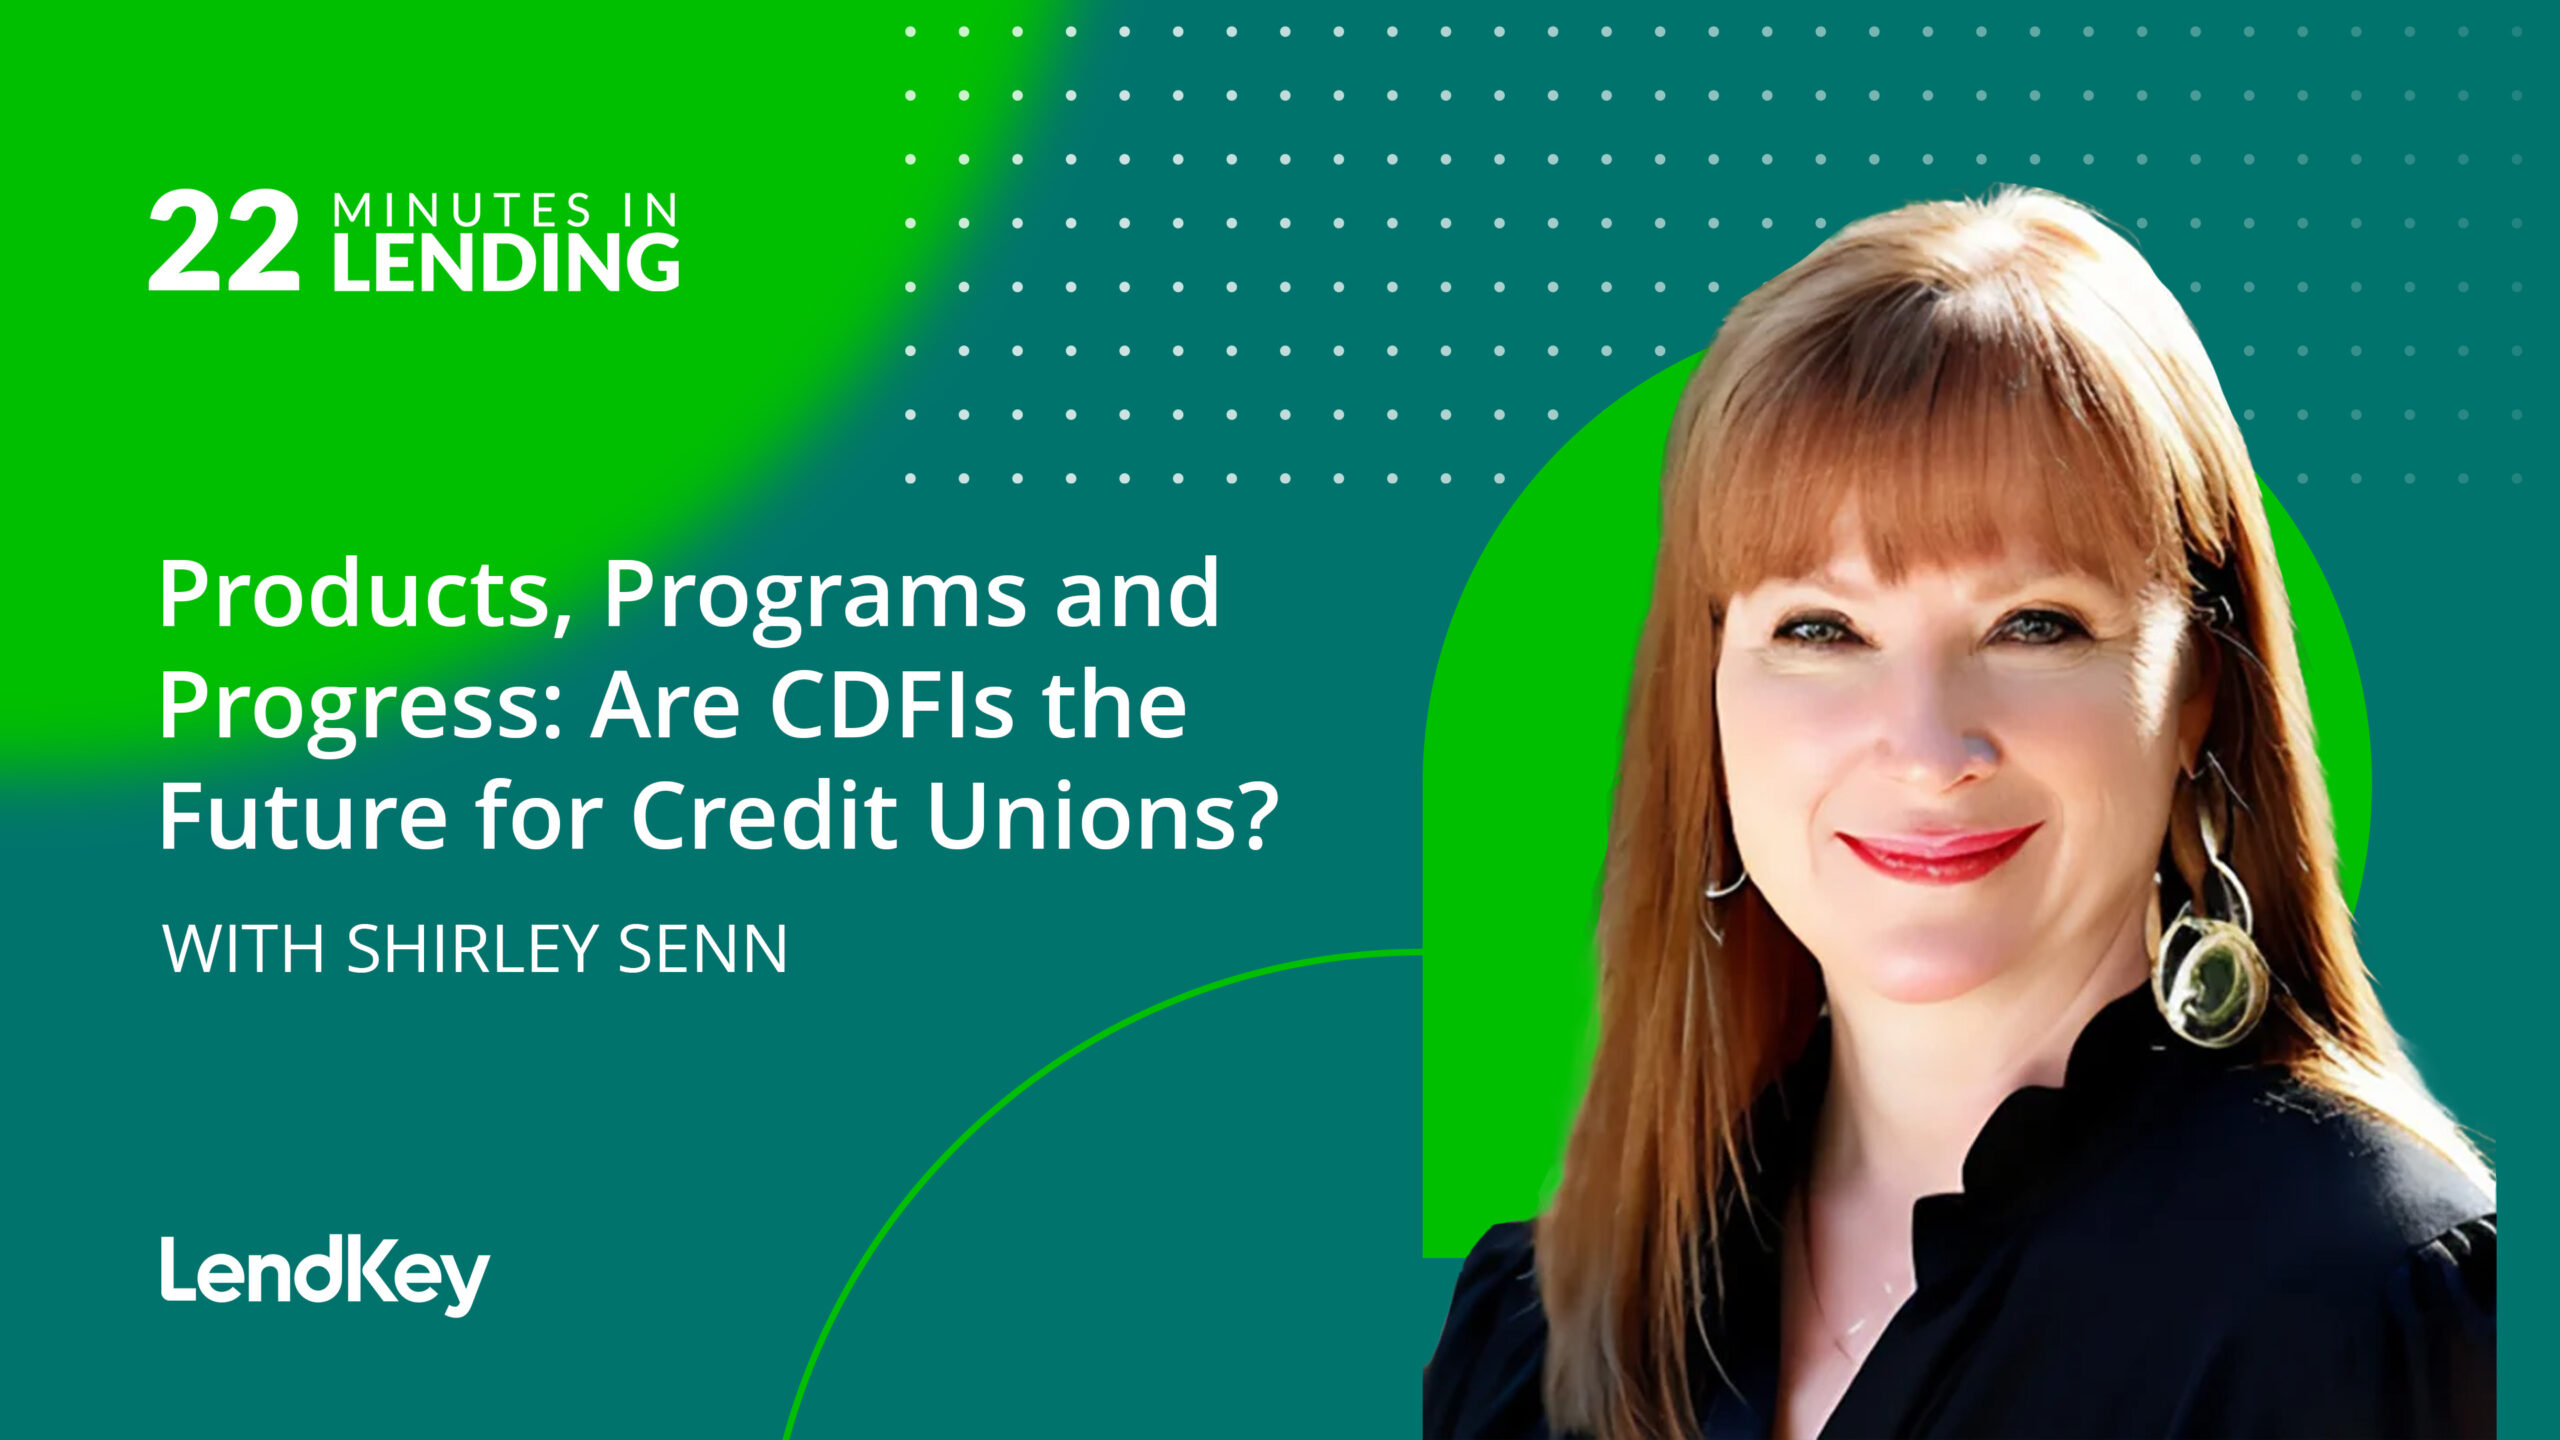 Featured image for “Products, Programs and Progress: Are CDFIs the Future for Credit Unions?”